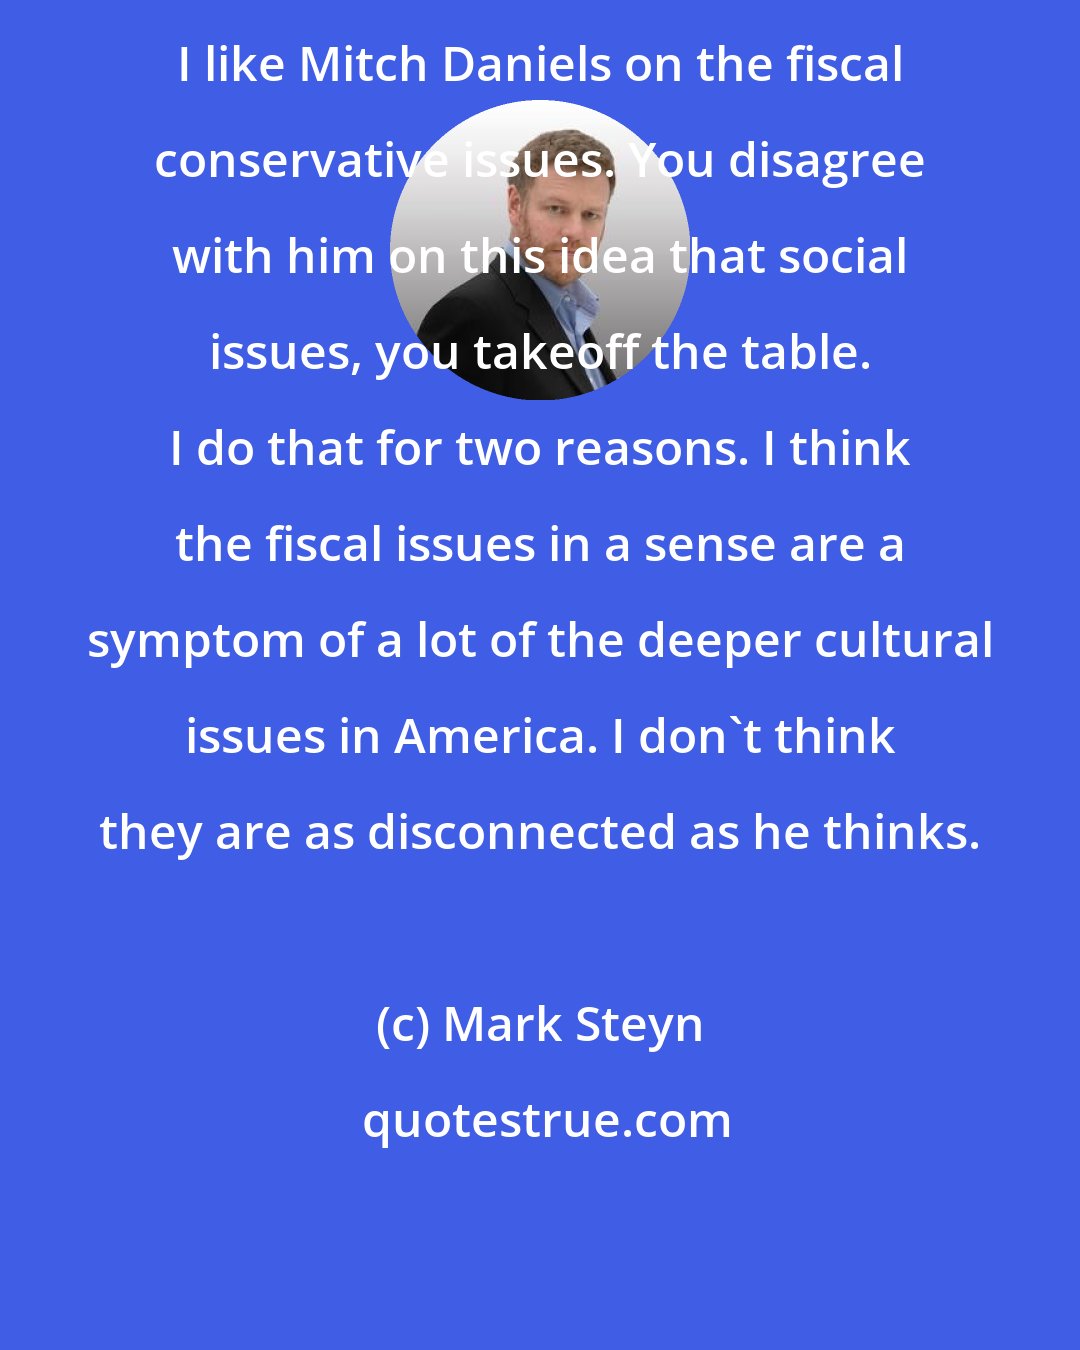 Mark Steyn: I like Mitch Daniels on the fiscal conservative issues. You disagree with him on this idea that social issues, you takeoff the table. I do that for two reasons. I think the fiscal issues in a sense are a symptom of a lot of the deeper cultural issues in America. I don't think they are as disconnected as he thinks.